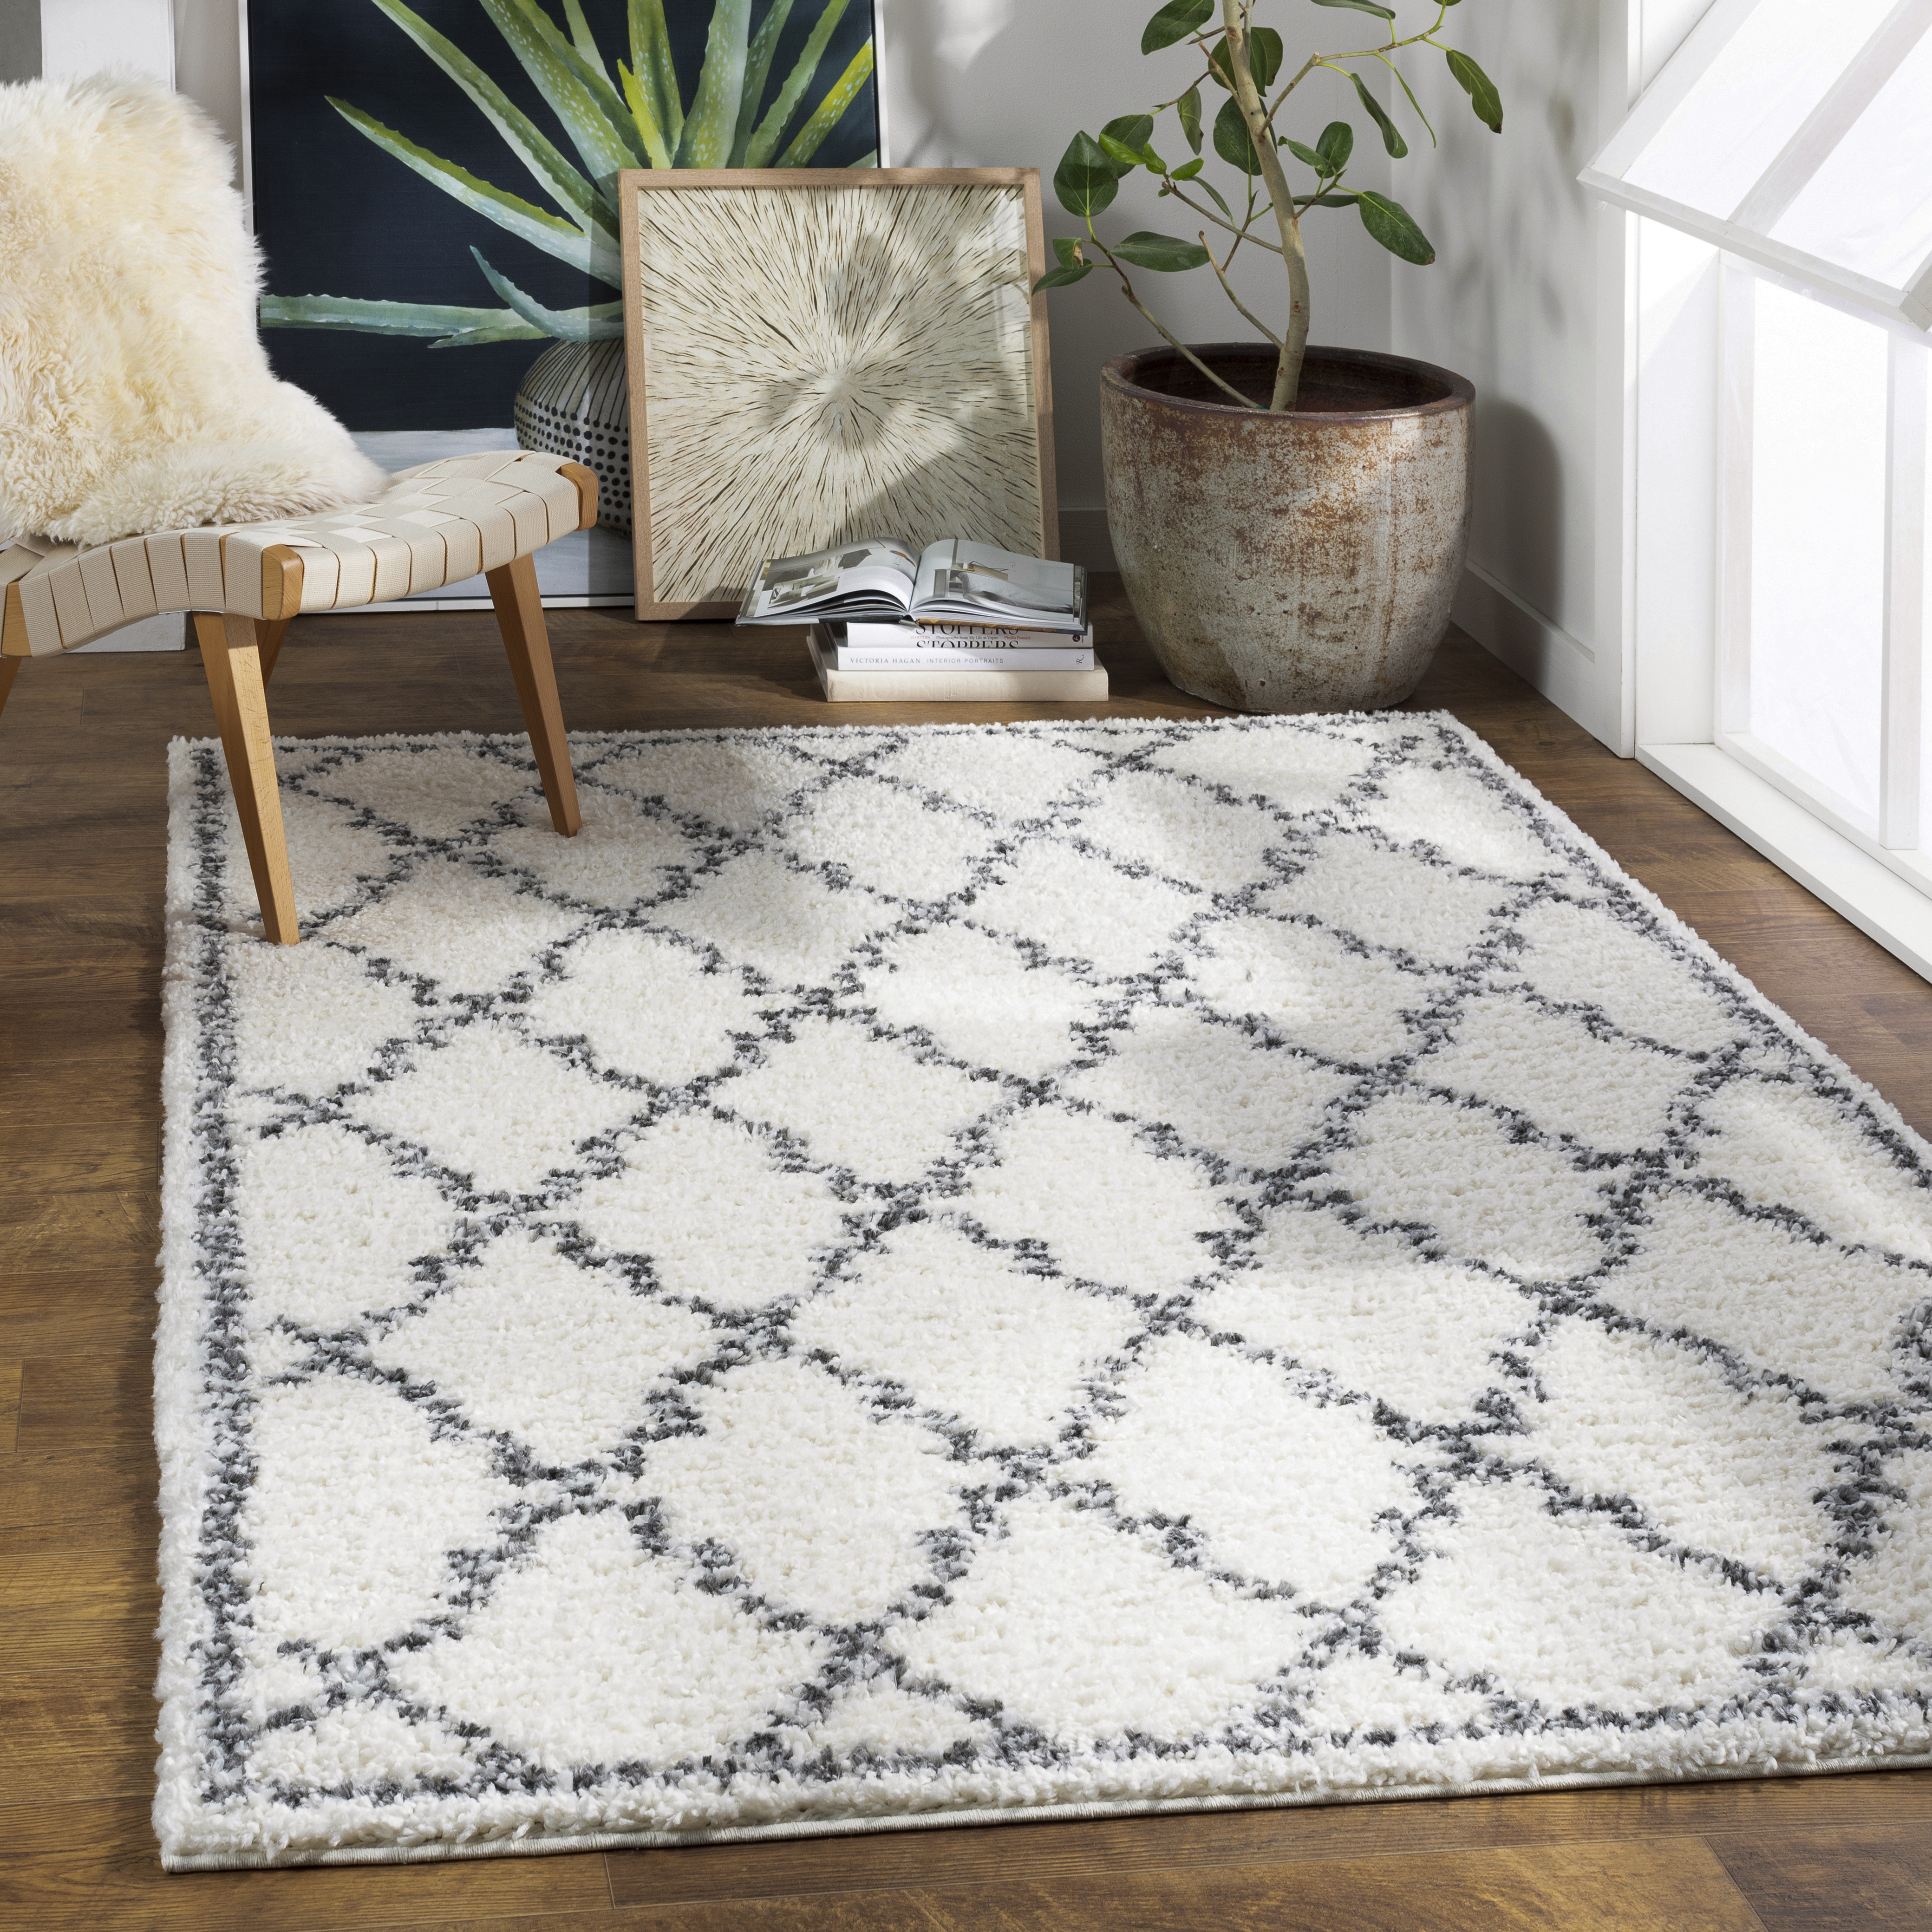 Deluxe Shag Rug, 5'3" x 7'3" - Image 1